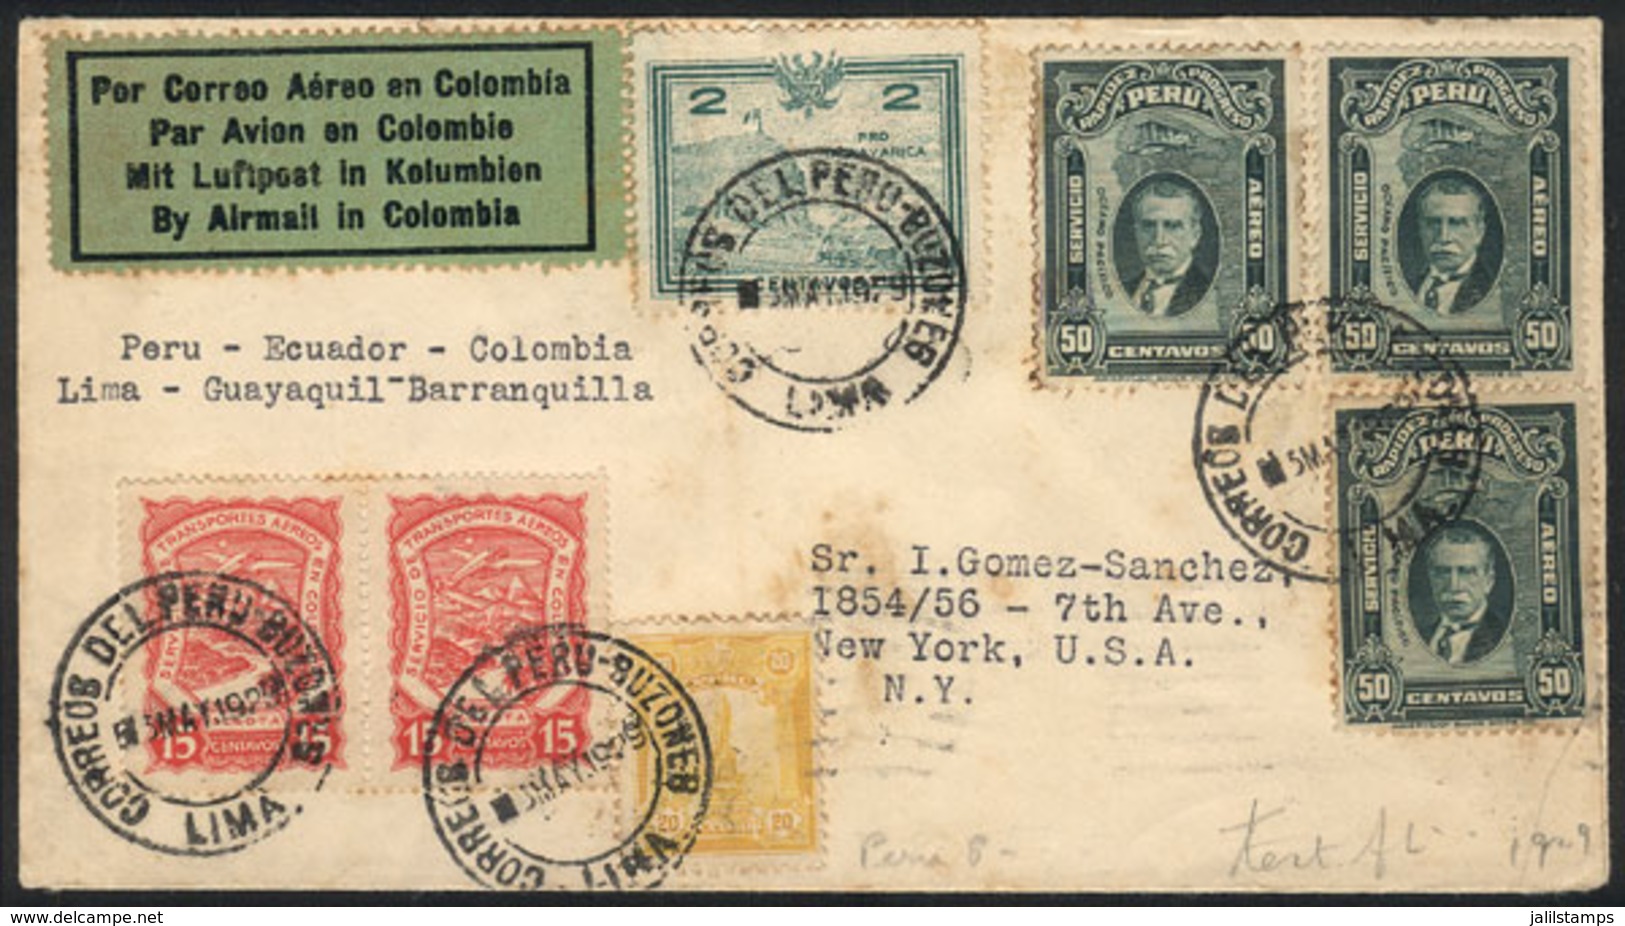 PERU: 3/MAY/1929 Lima - New York, Test Flight Lima - Cristobal (Panama Canal), Cover With Mixed Postage Of Peru And Colo - Pérou